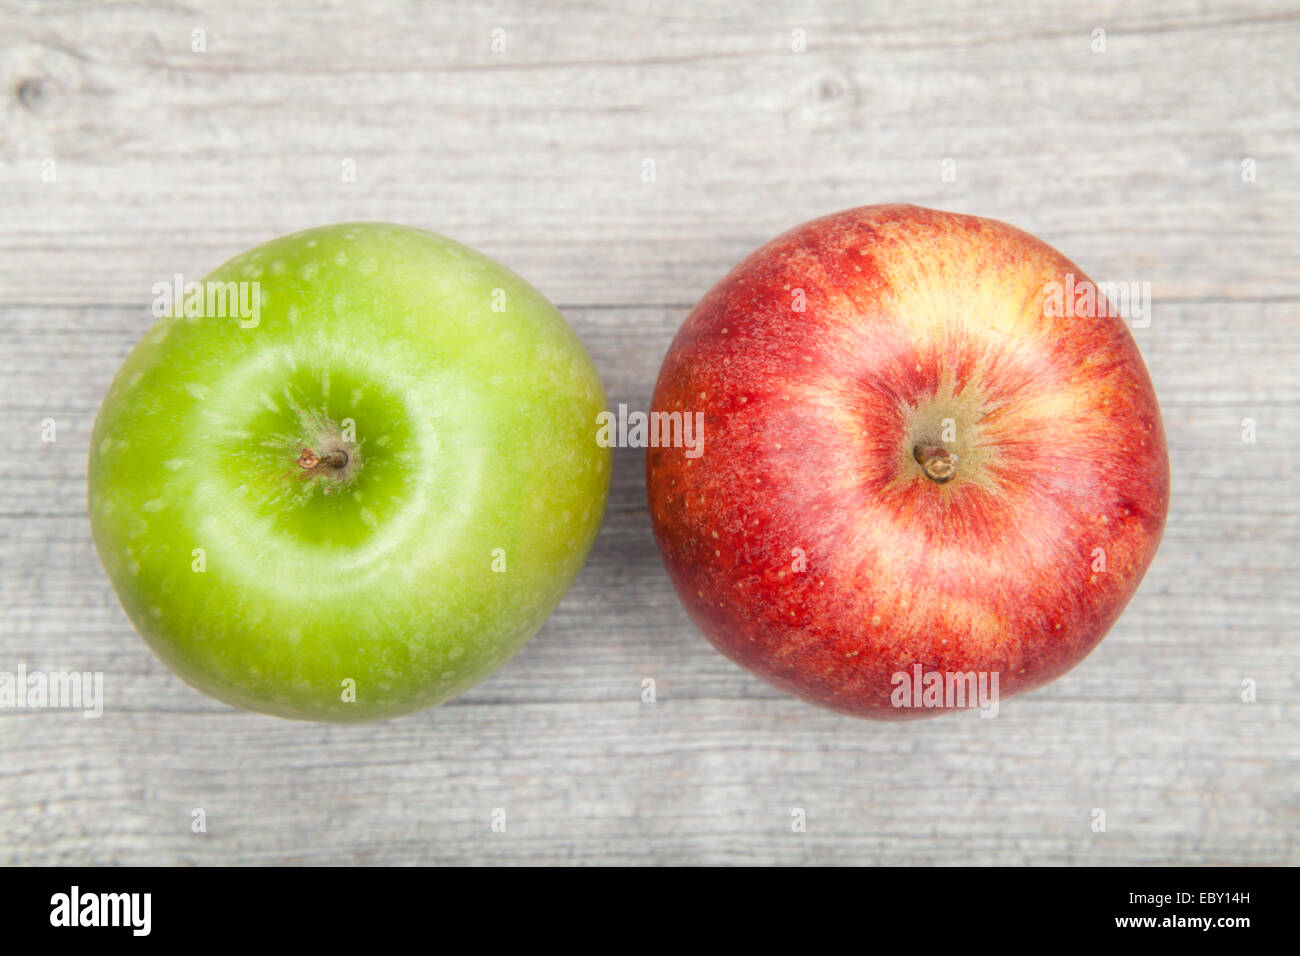 red and green apple on table Stock Photo